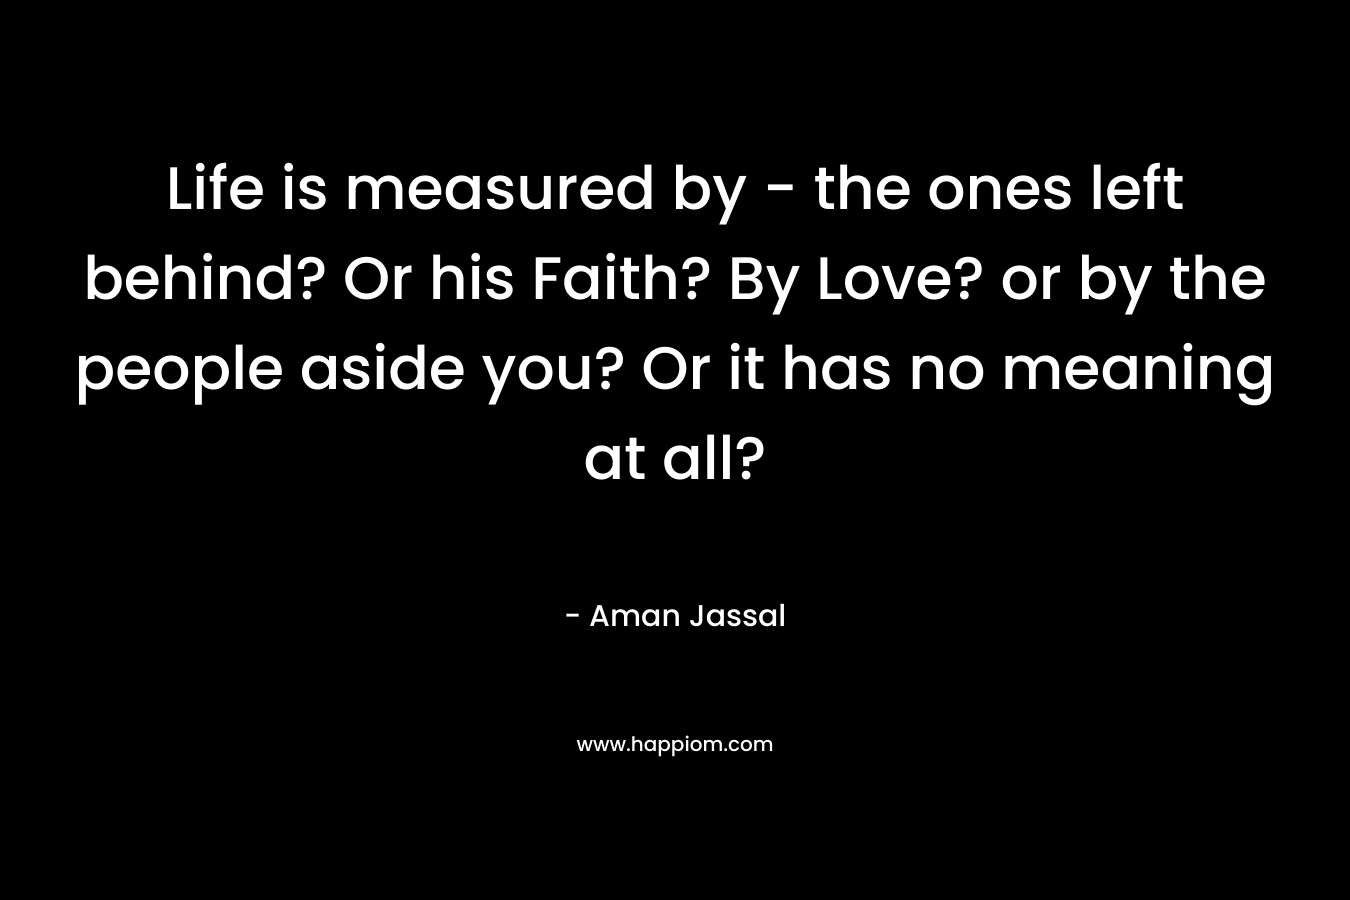 Life is measured by - the ones left behind? Or his Faith? By Love? or by the people aside you? Or it has no meaning at all?